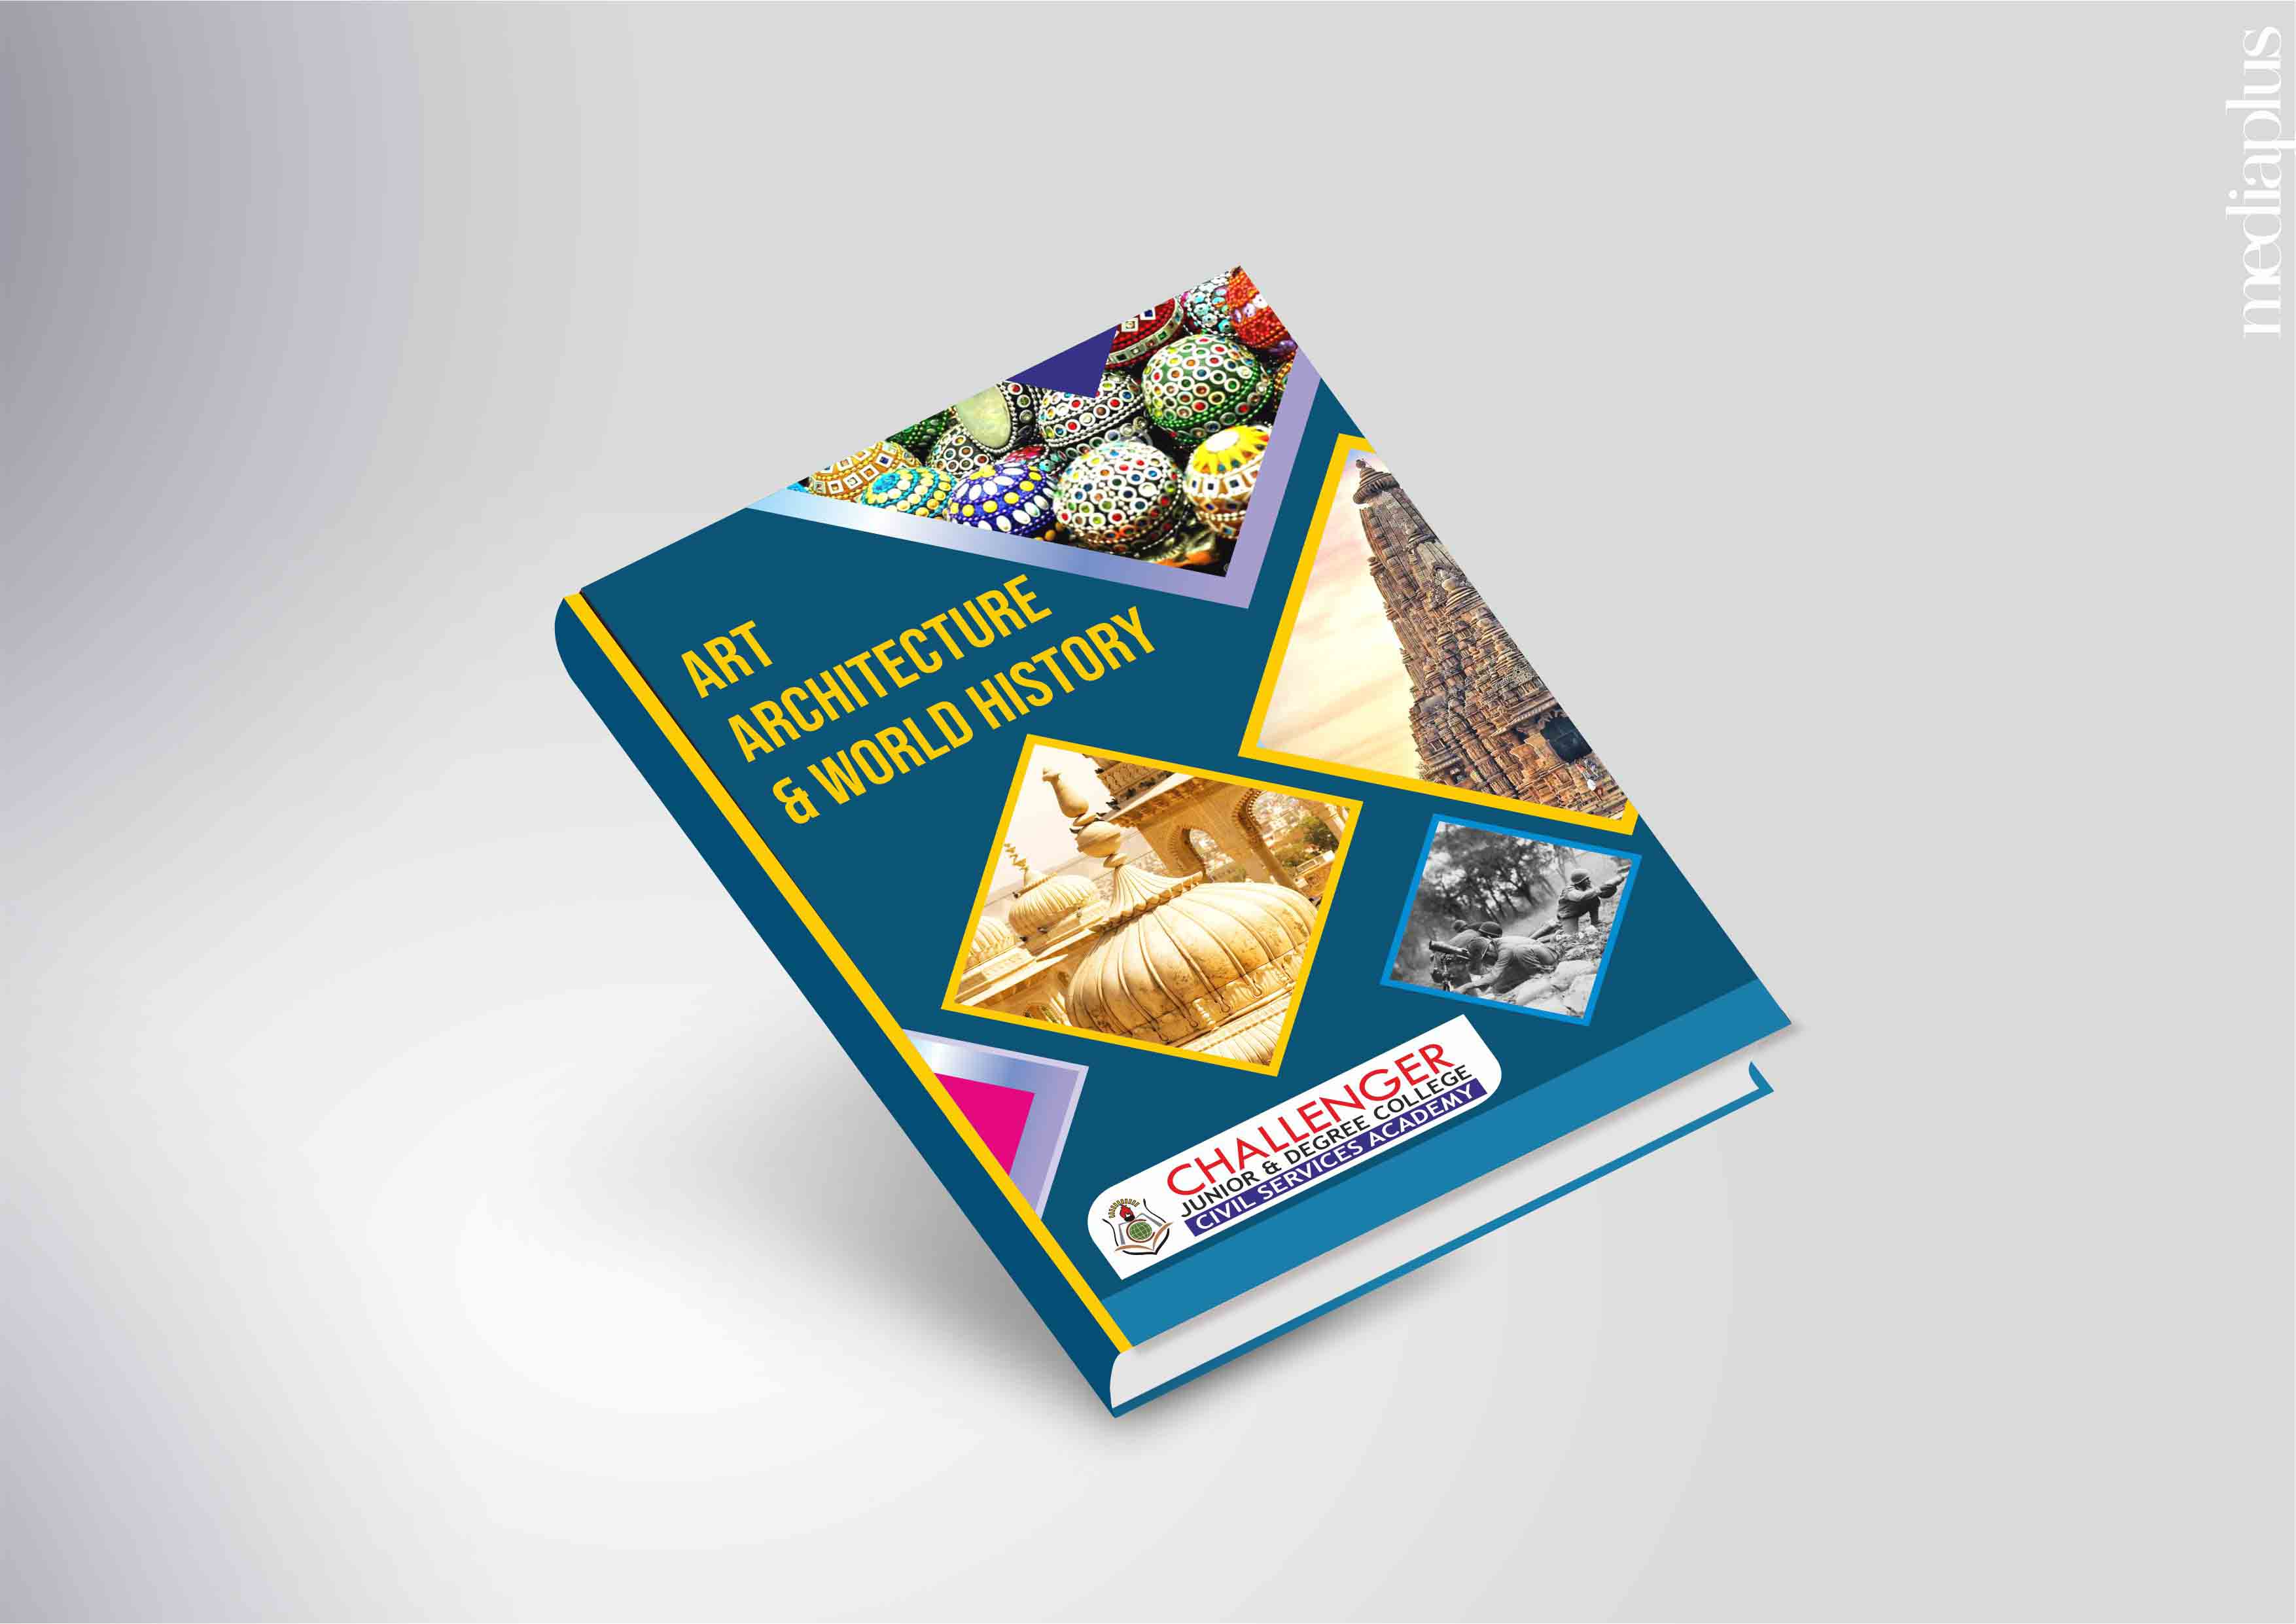 Text Book Design Printing and Publishing Services by Media Plus